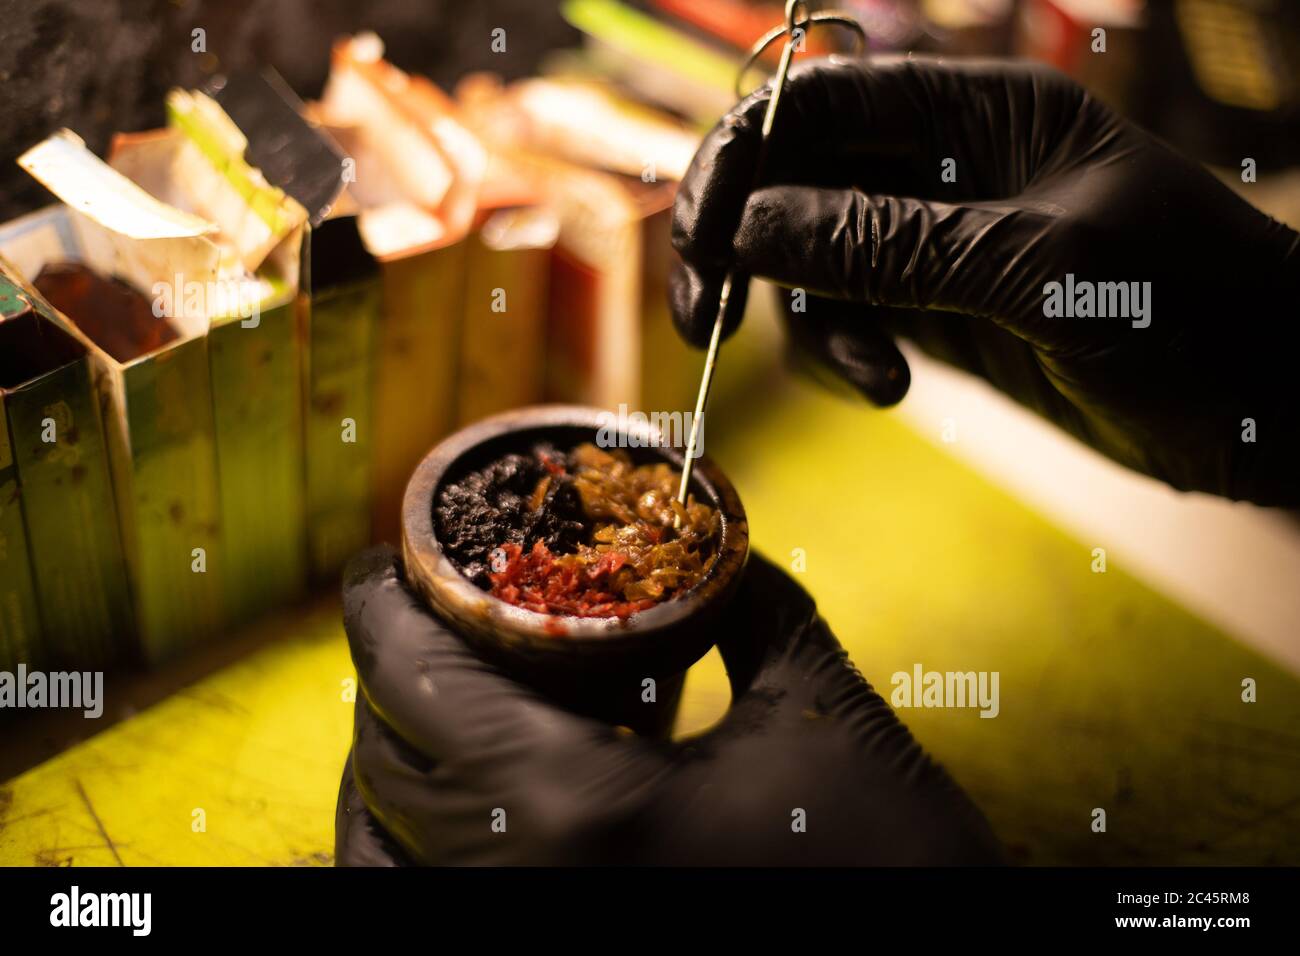 Preparation of Hookah bowl with tabacco leaf hands Stock Photo